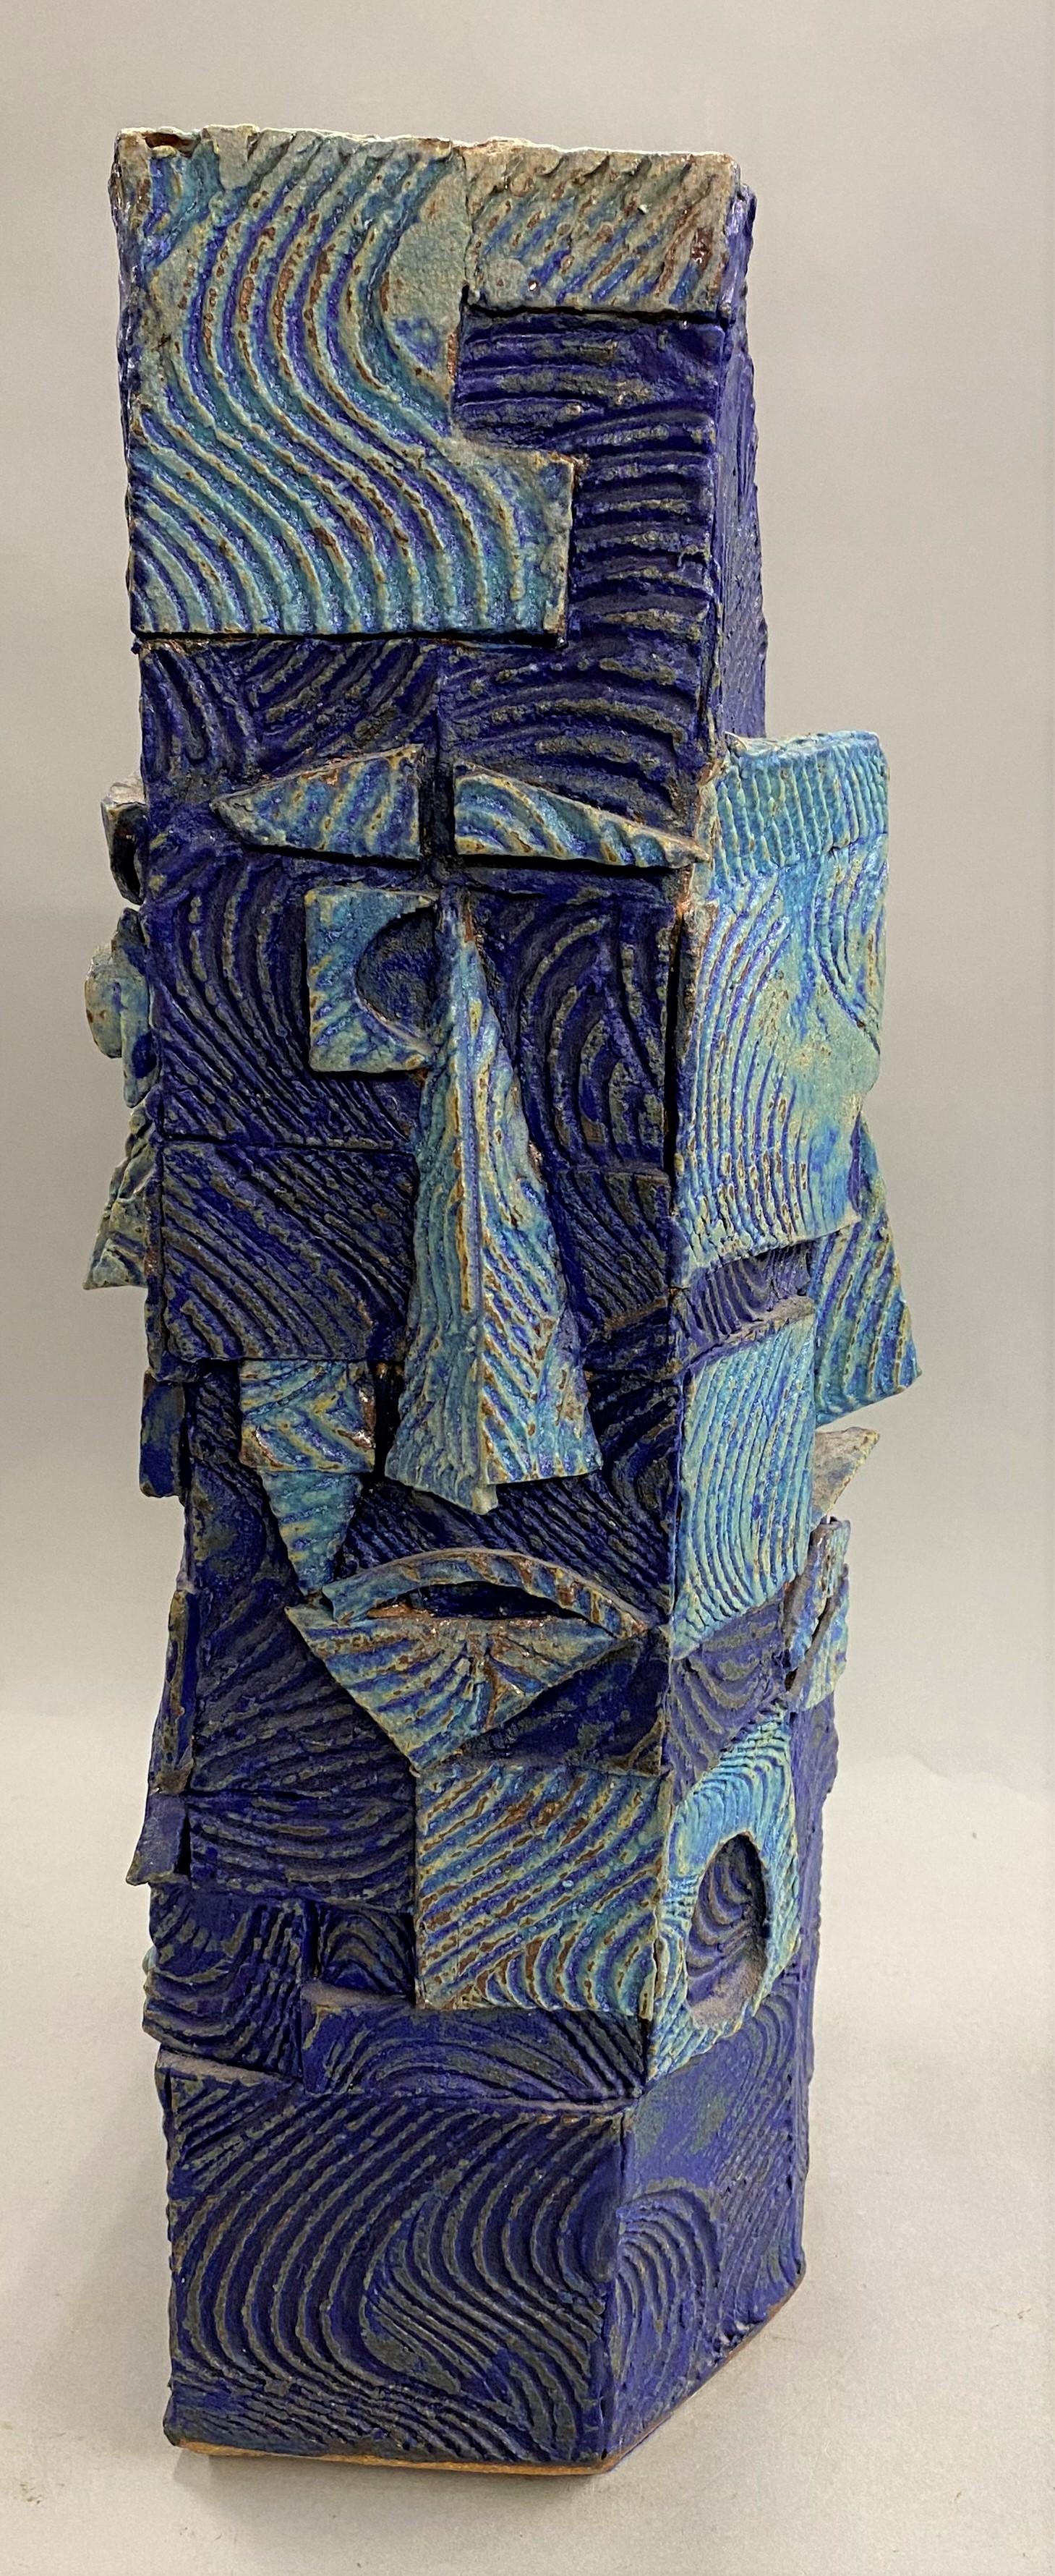 A wonderful example of an abstract ceramic or sculpture in blue, referred to as a bird house or face vase, by Indian / American artist Gerry Williams (1926-2014). Williams was born in India from American parents, and eventually set up a studio and